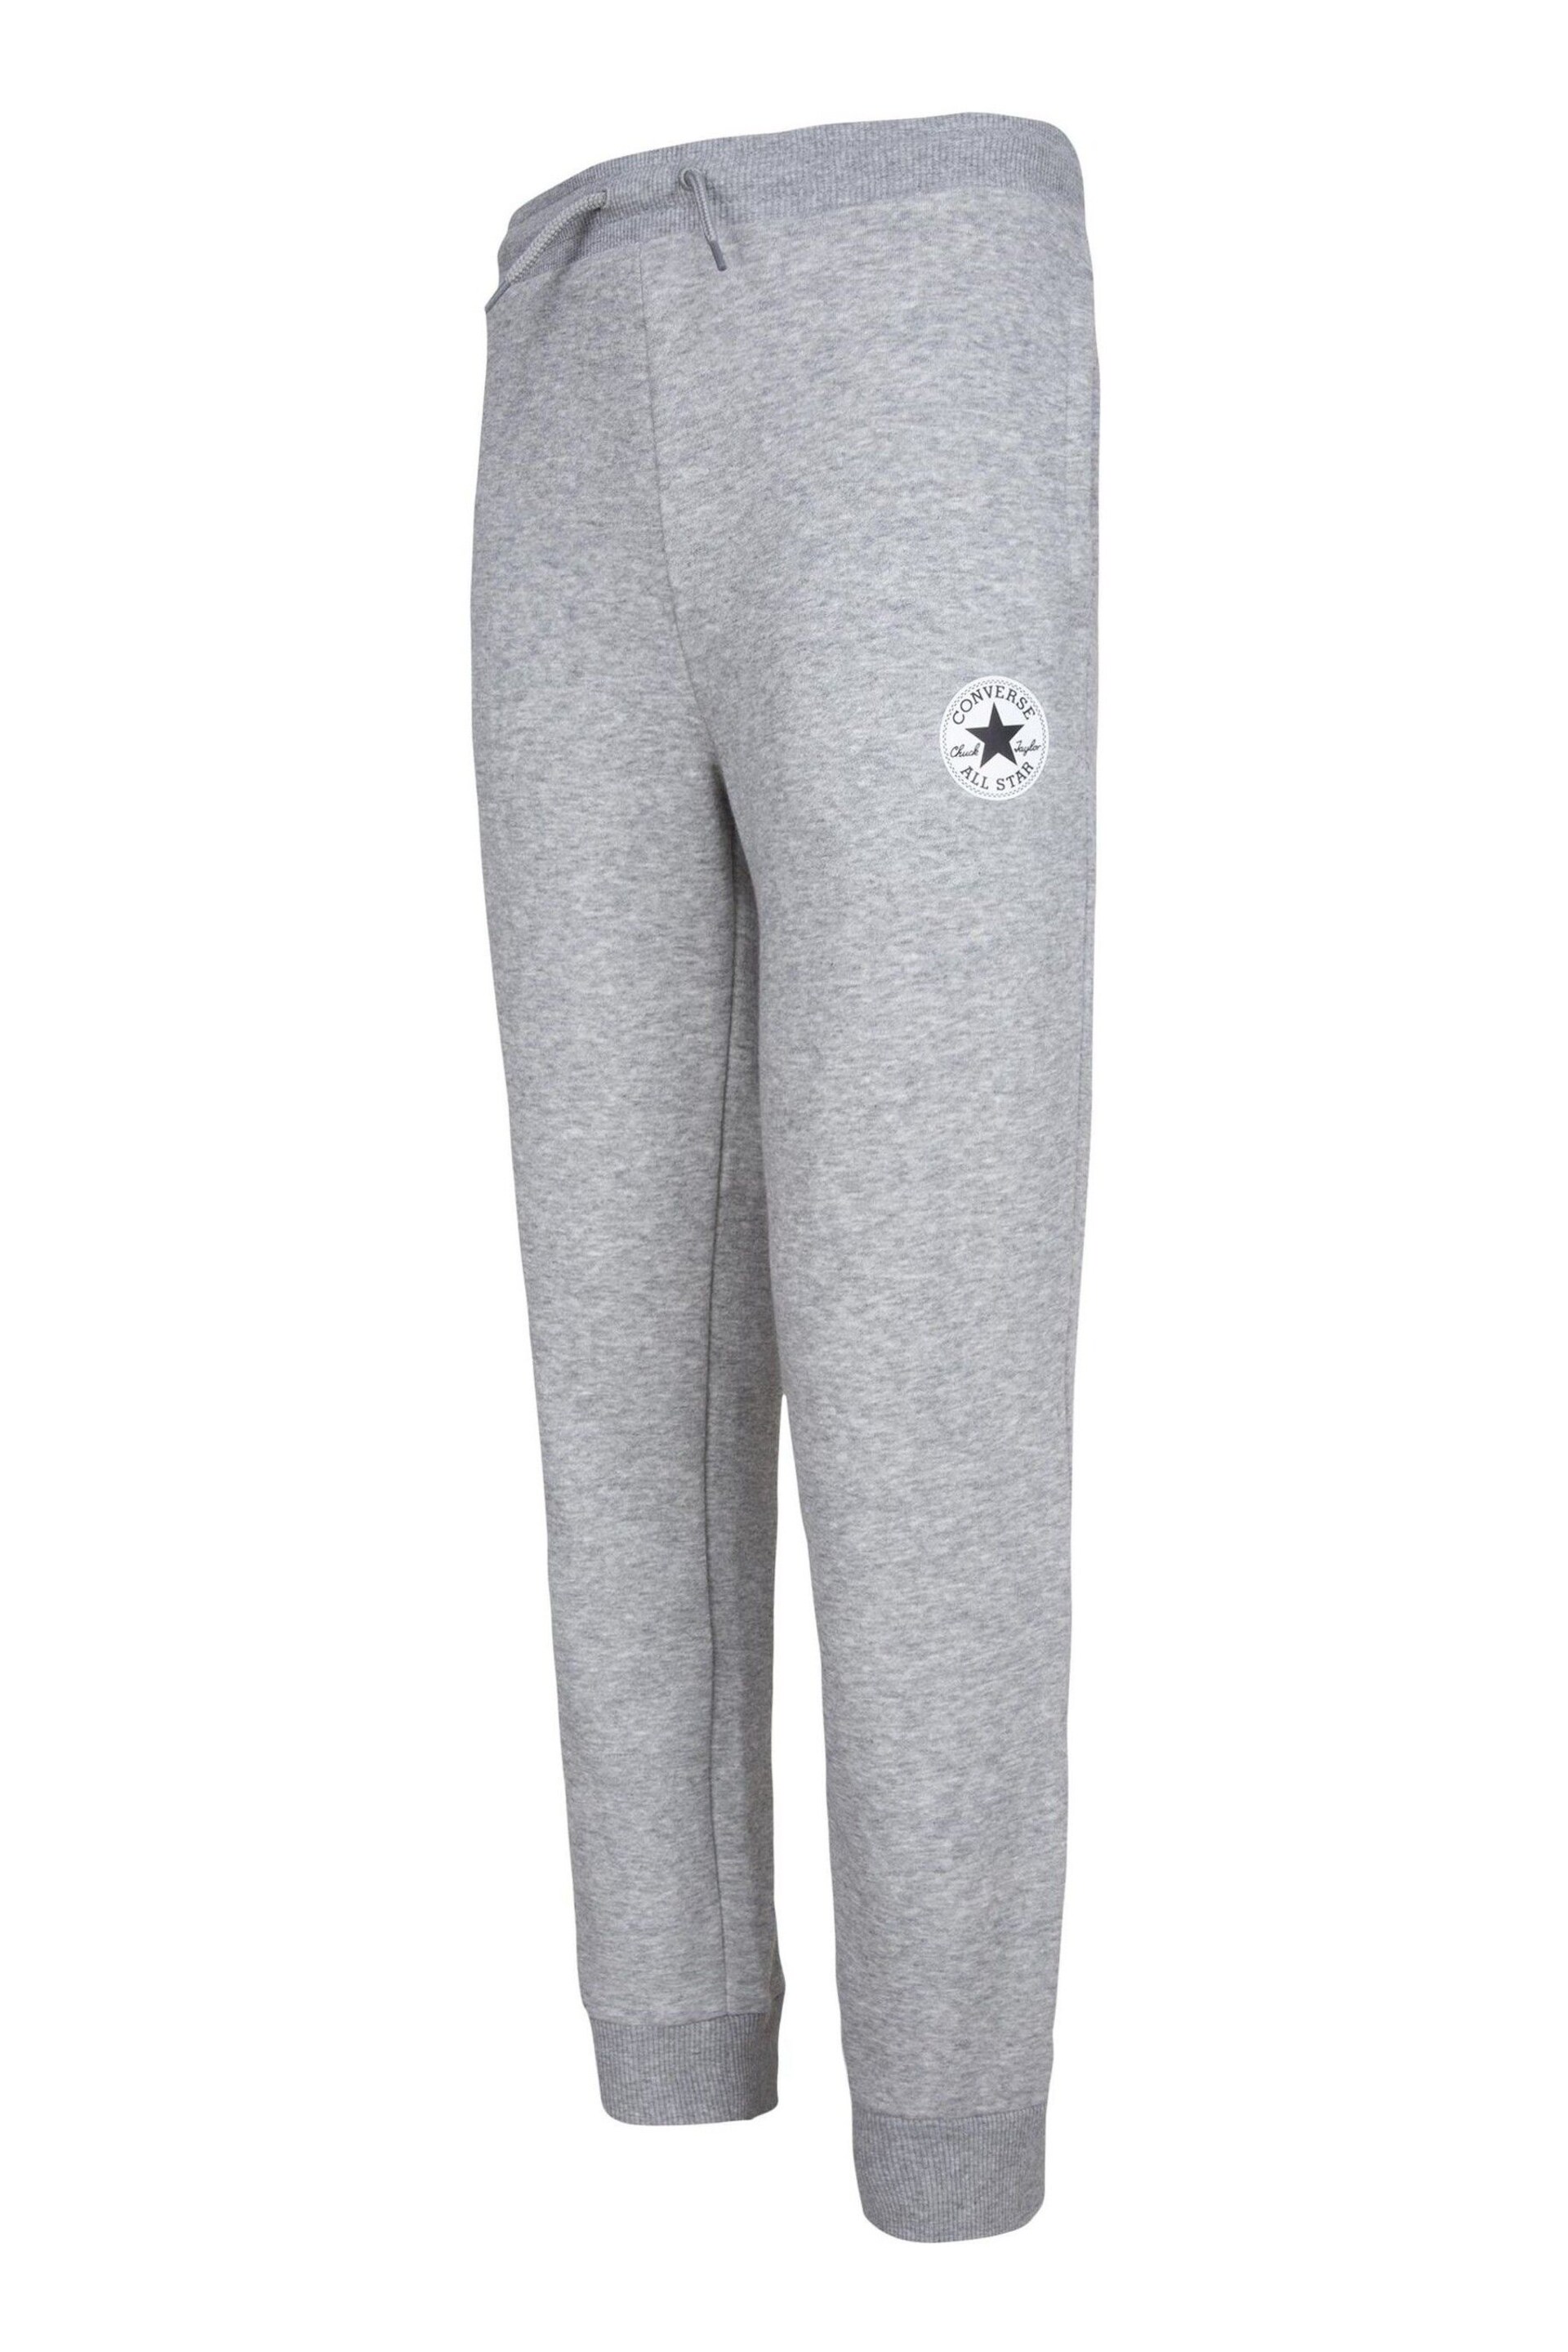 Converse Grey Signature Chuck Patch Joggers - Image 1 of 7